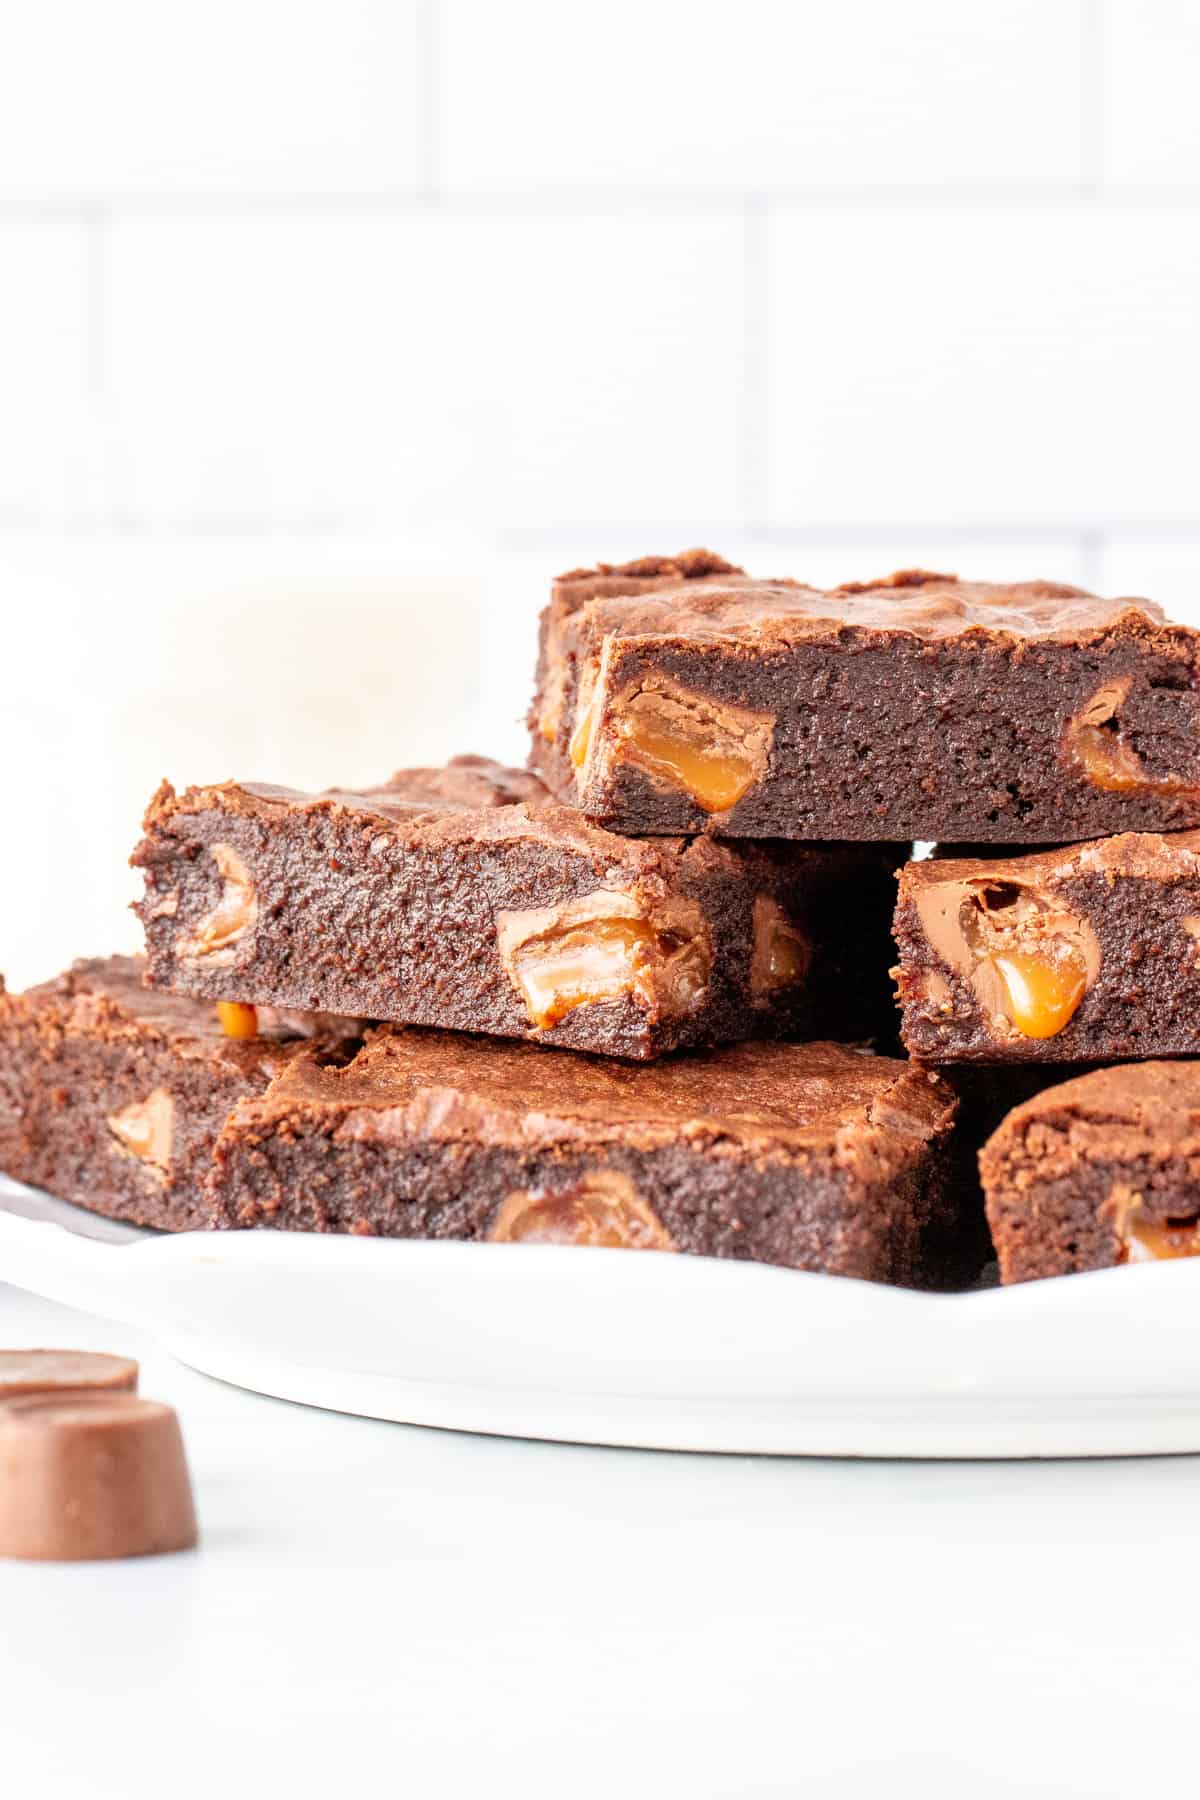 Plate of brownies stuffed with Rolo candies